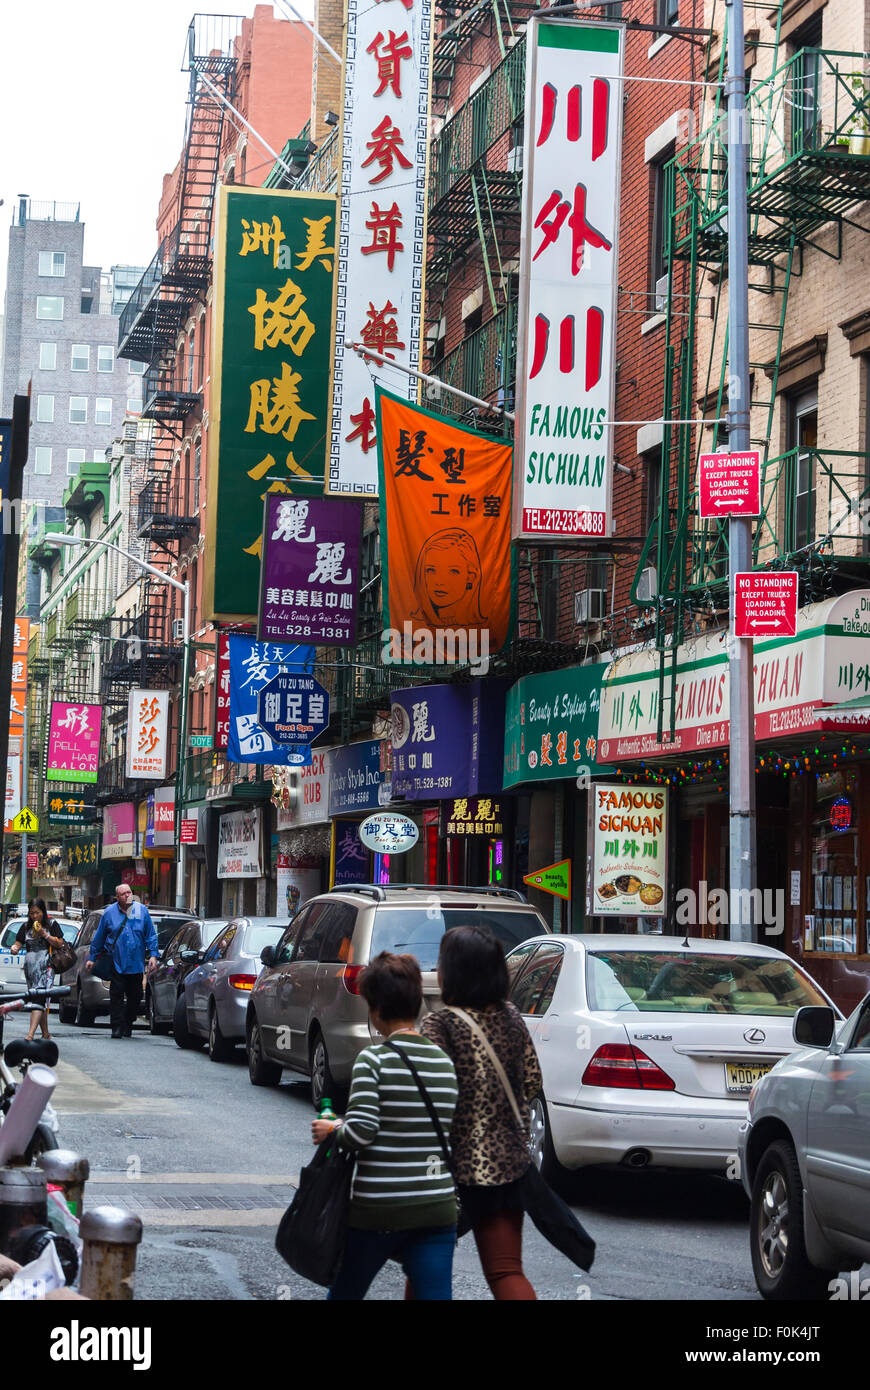 New York City, USA, Shopping Street Scenes, Chinatown District, Chinese Language, Signs, city colour, poor neighborhood usa Stock Photo